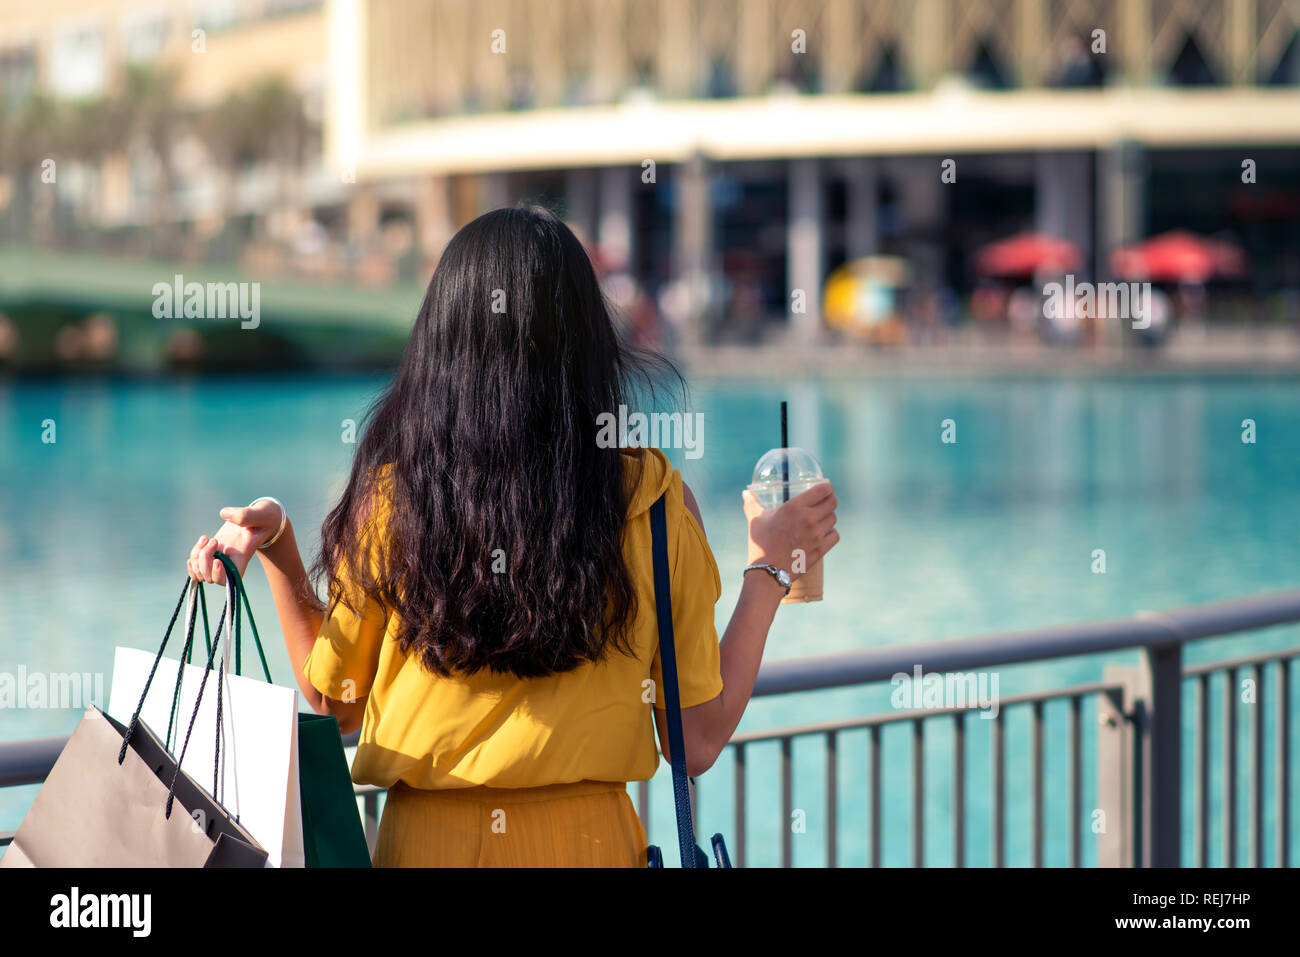 Girl with shopping bags in front of a mall outdoors Stock Photo